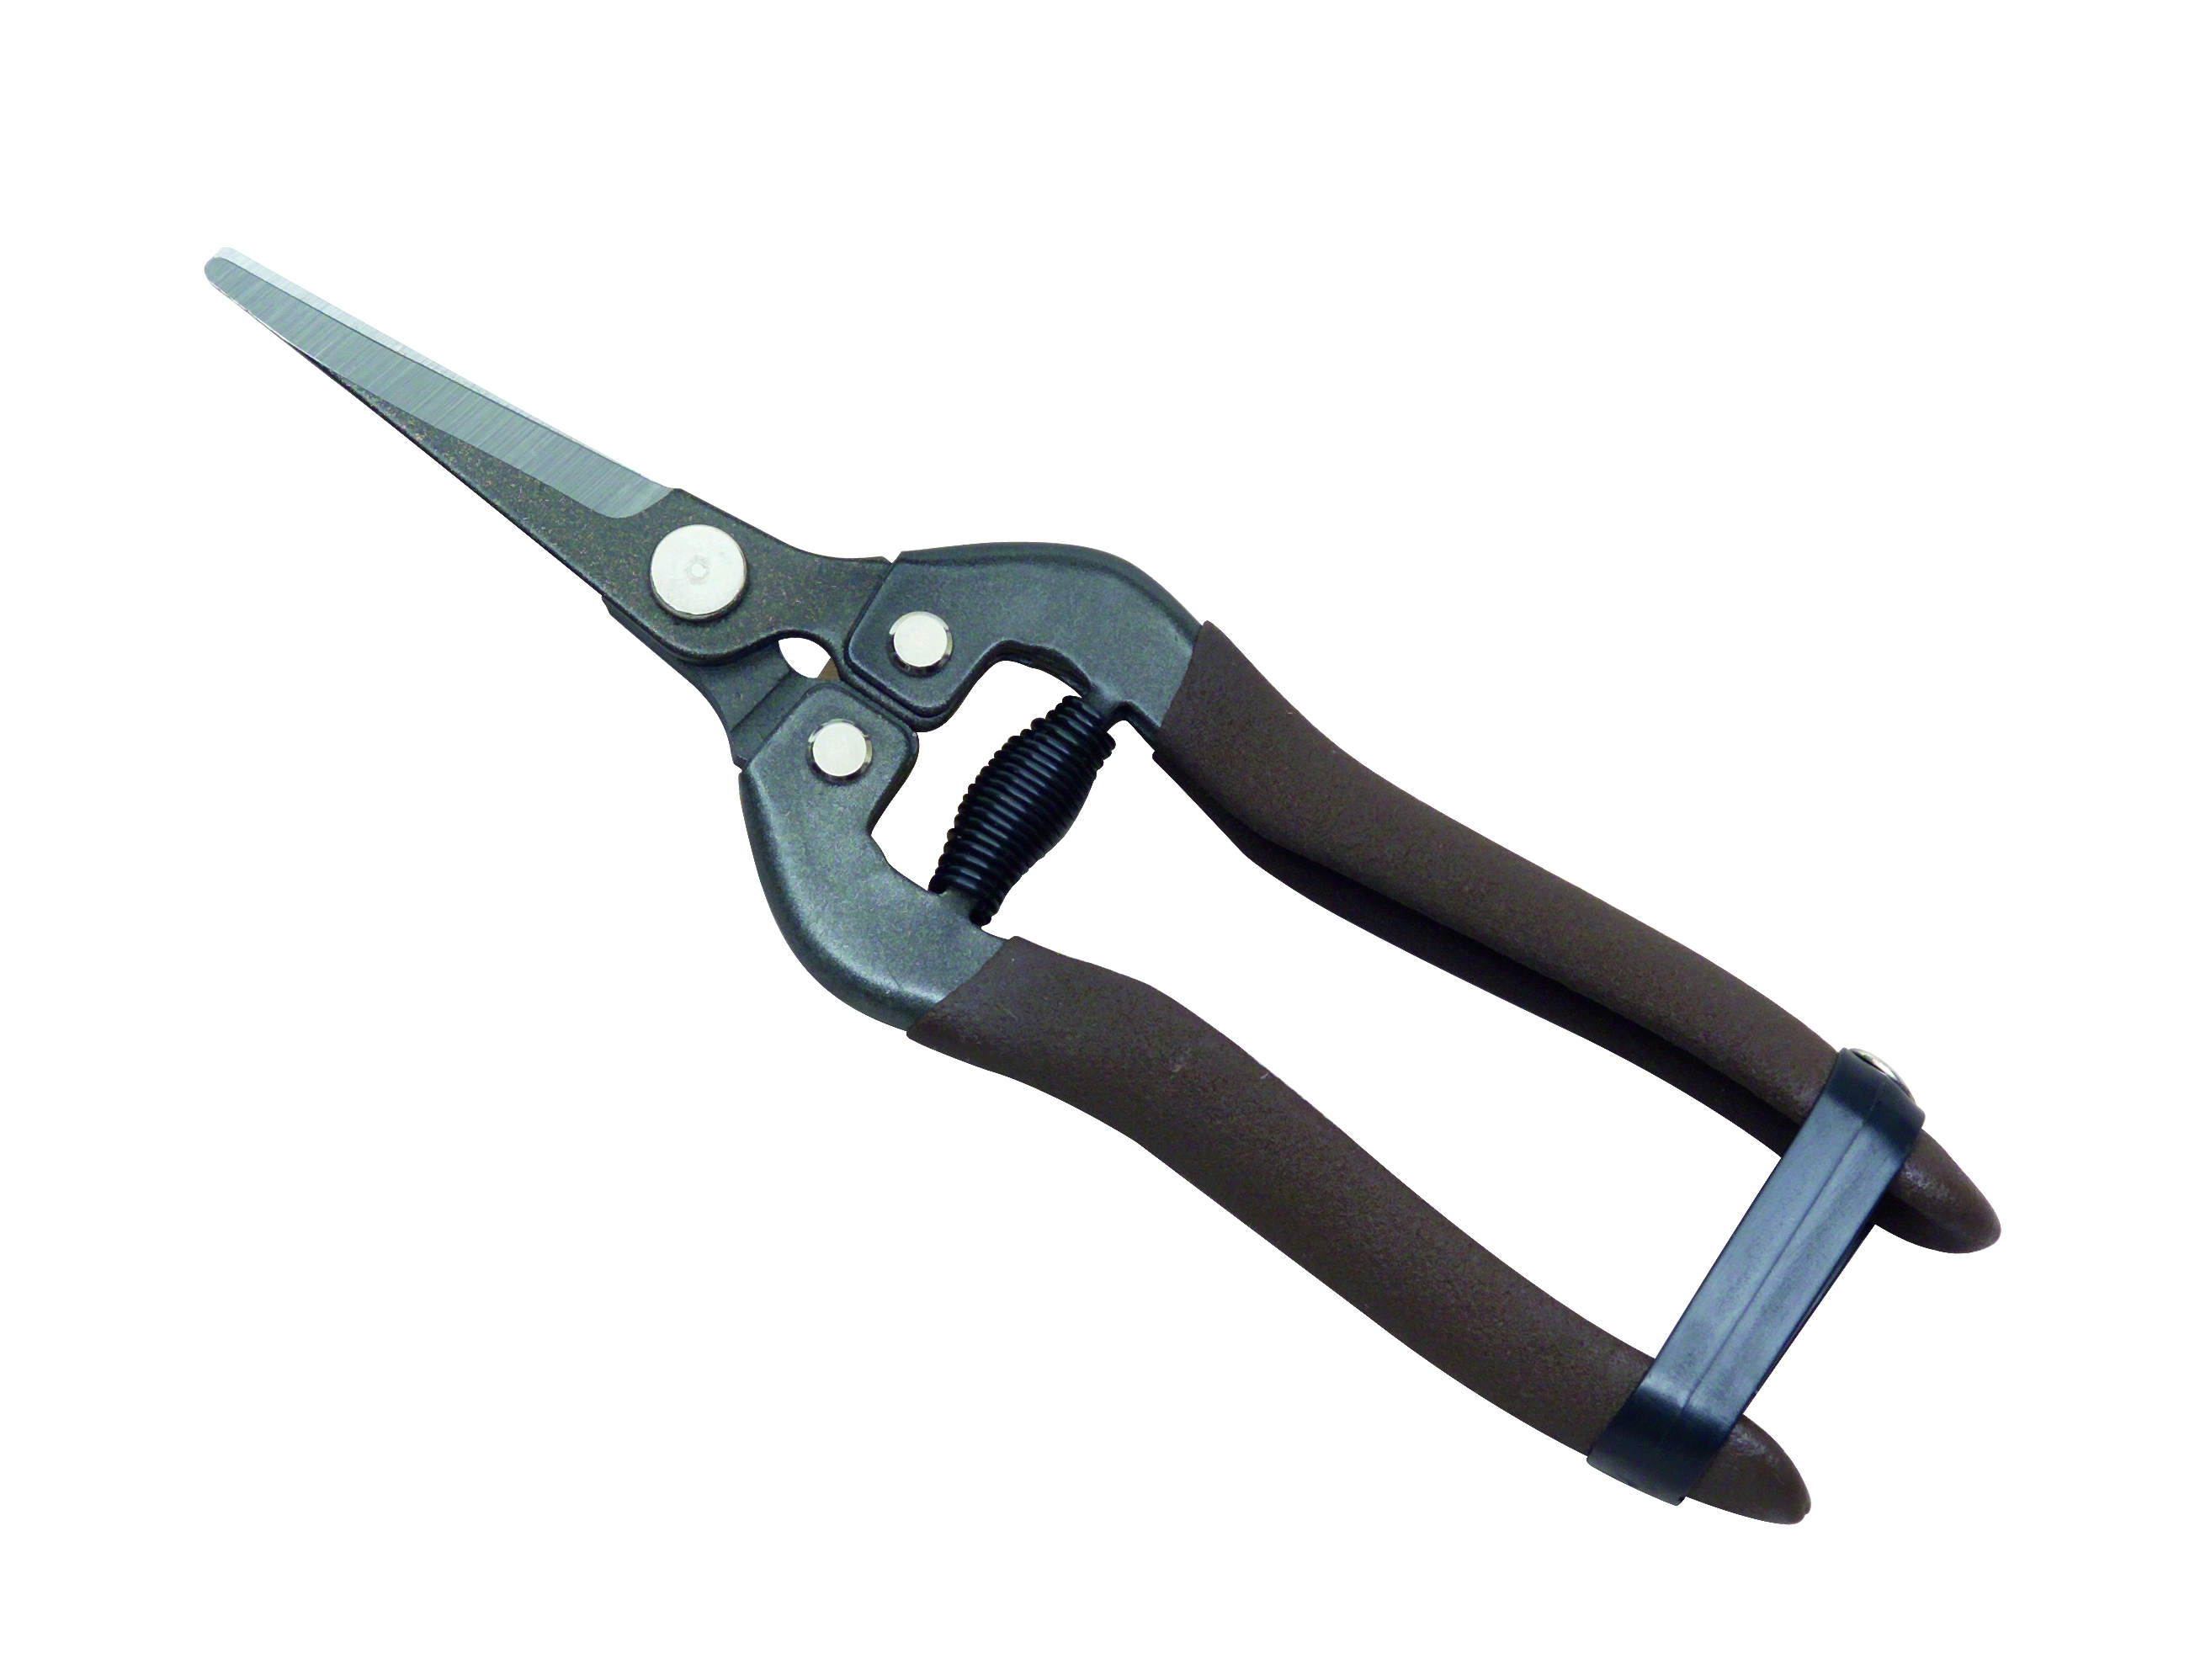 Flexrake Carbon Steel Shears - image 1 of 1